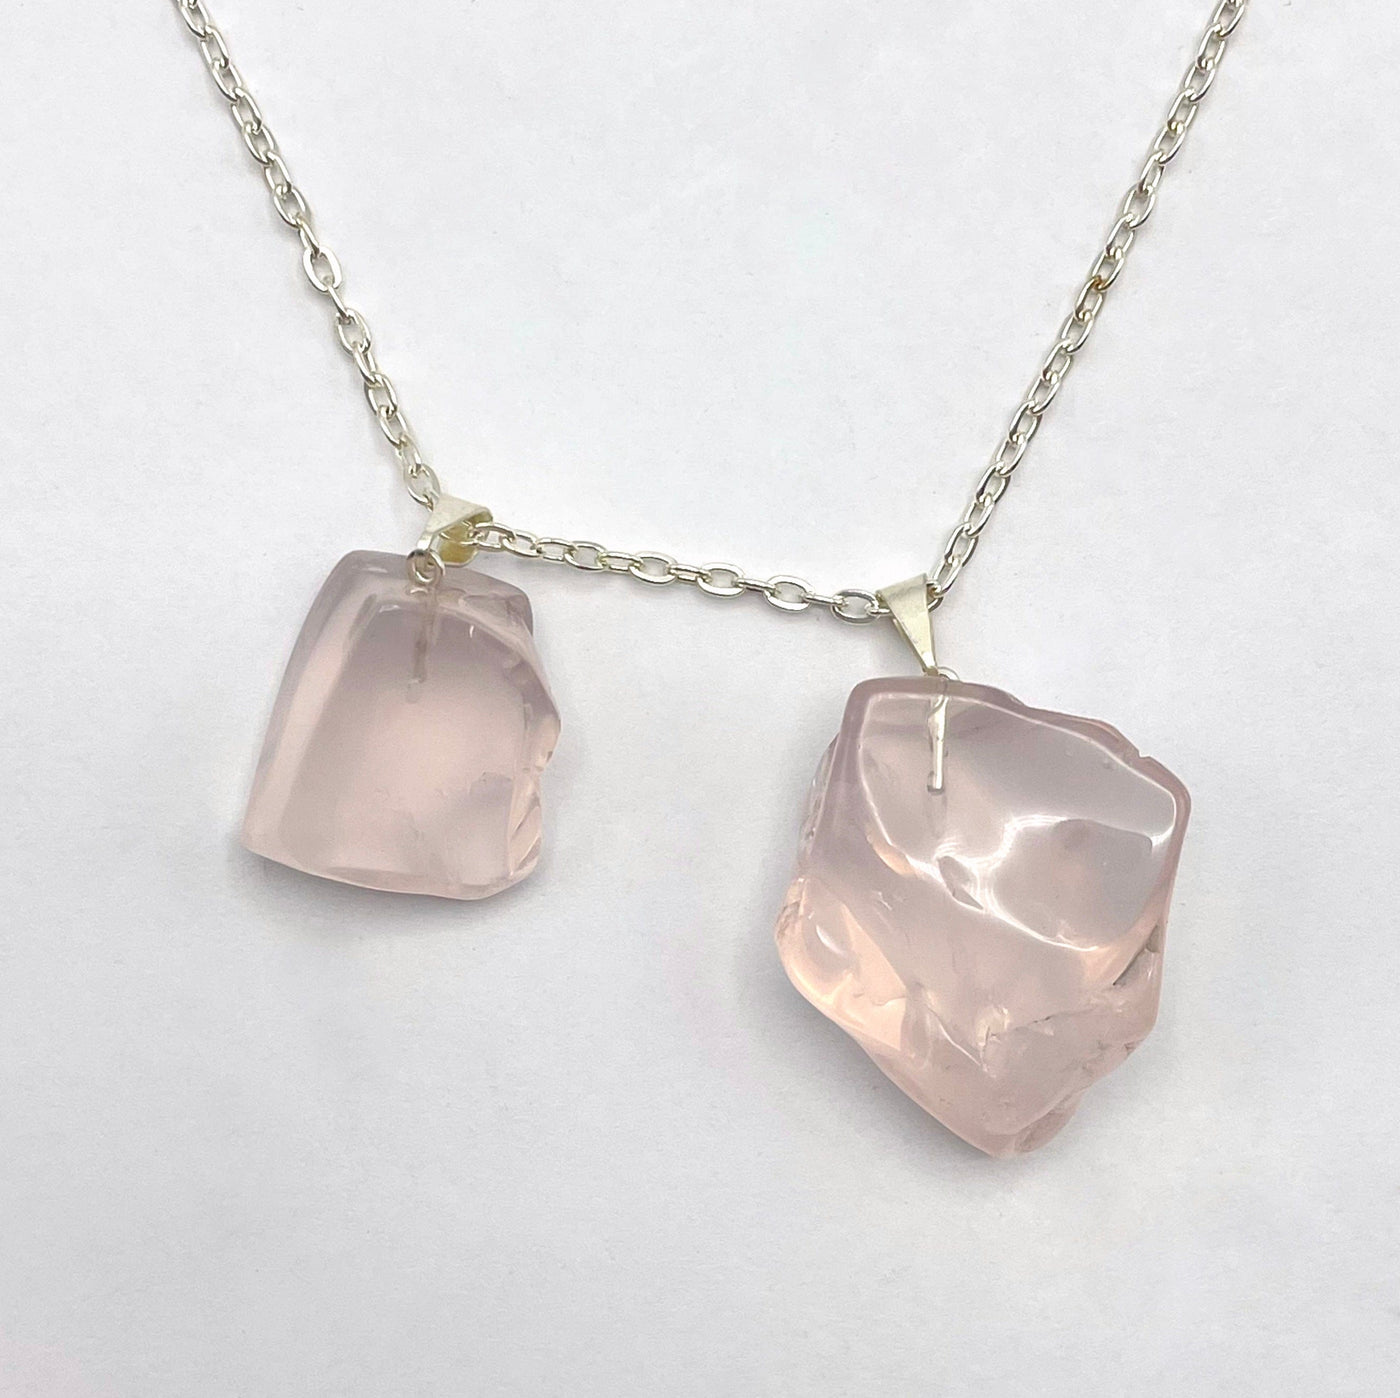 two tumbled rose quartz pendants on white background with silver chain strung through silver bail